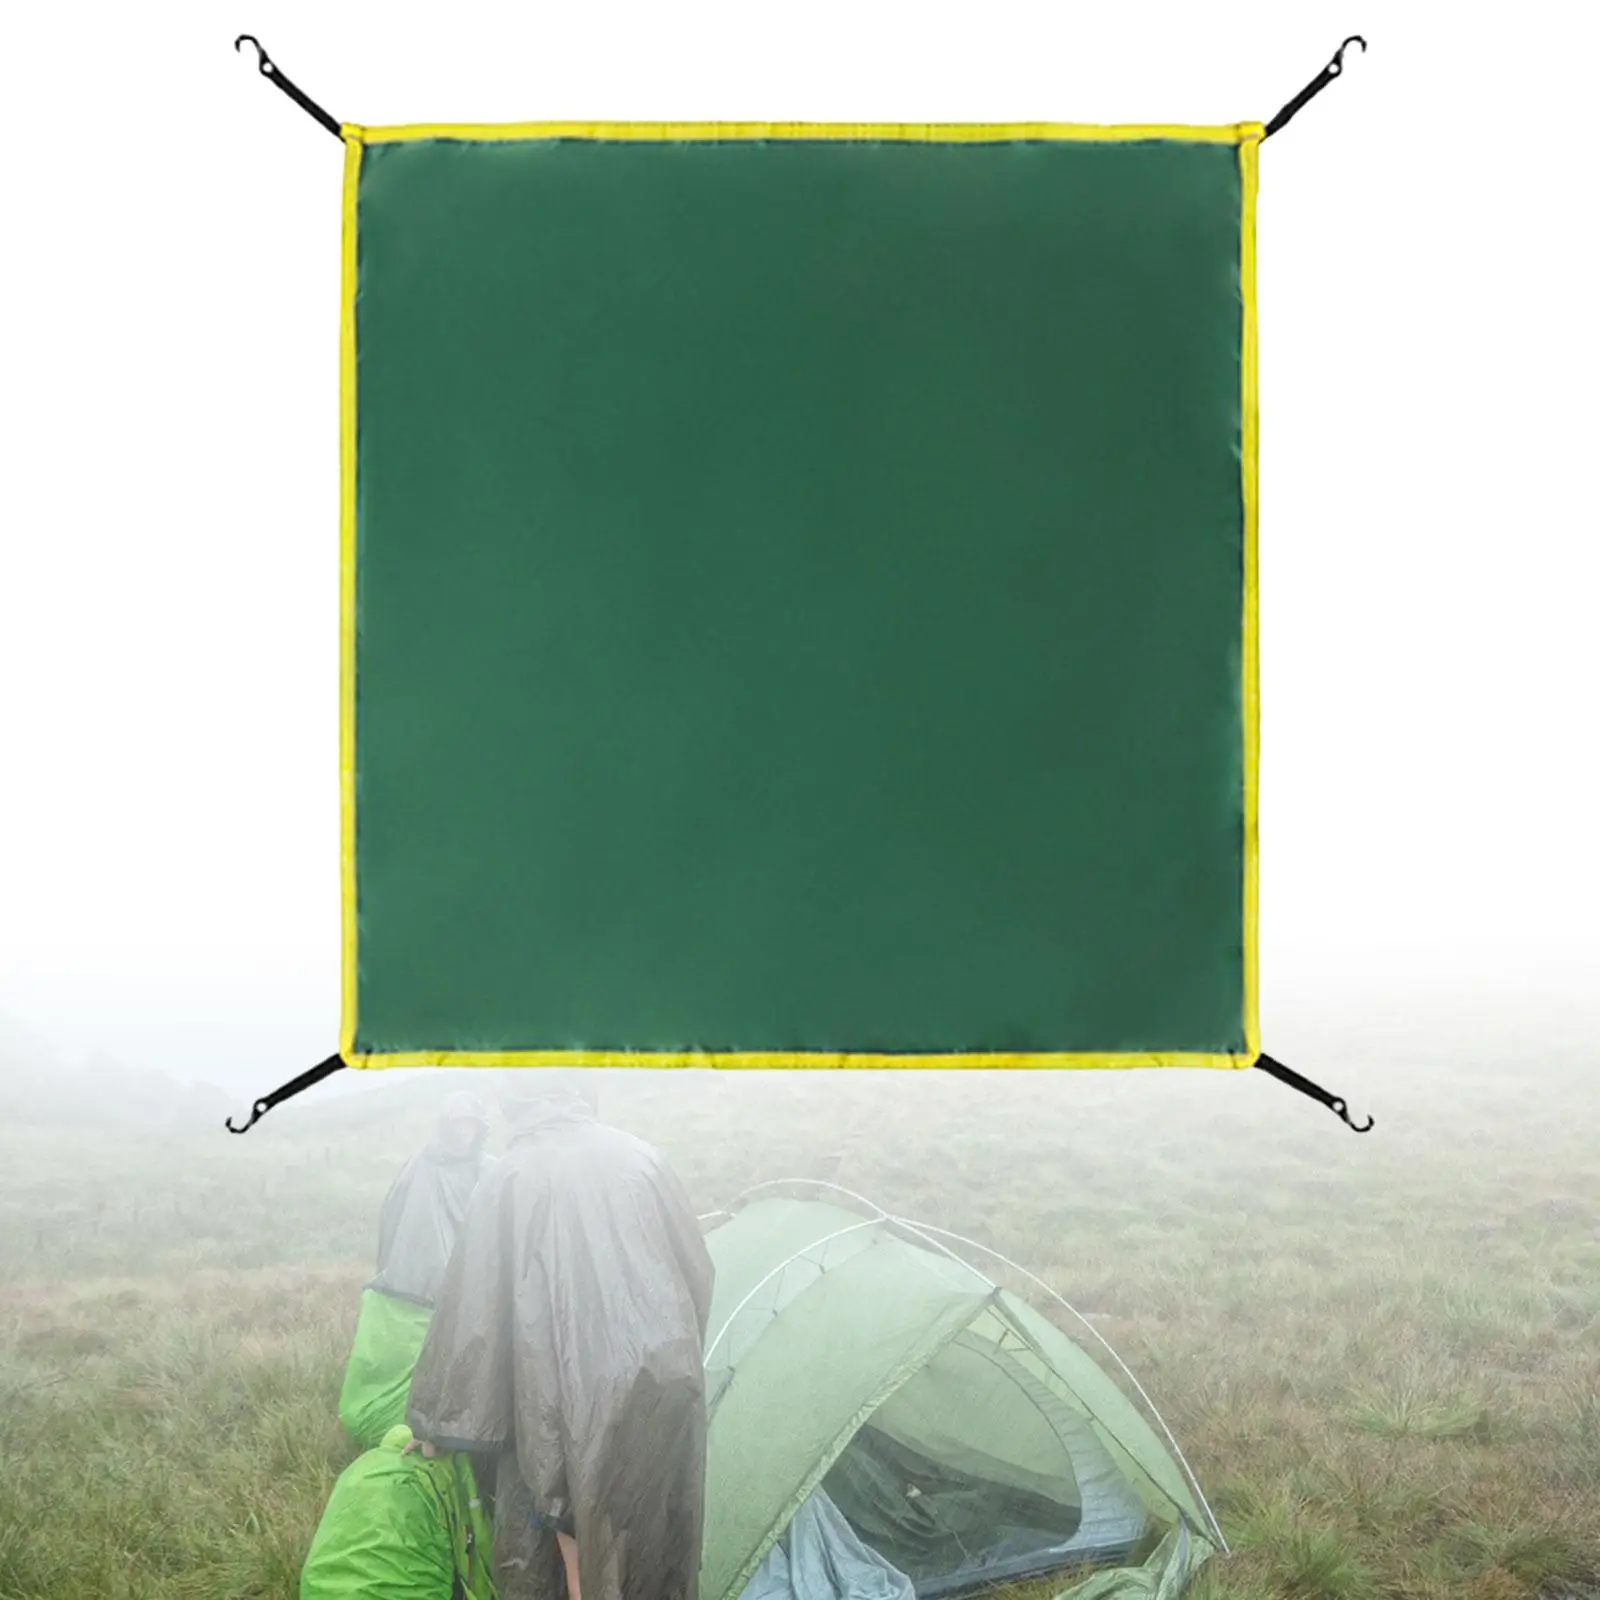 Rainfly Tent Top Cover, Rain Fly Fits 3-4 Persons, Instant Tent, Top Tarp for